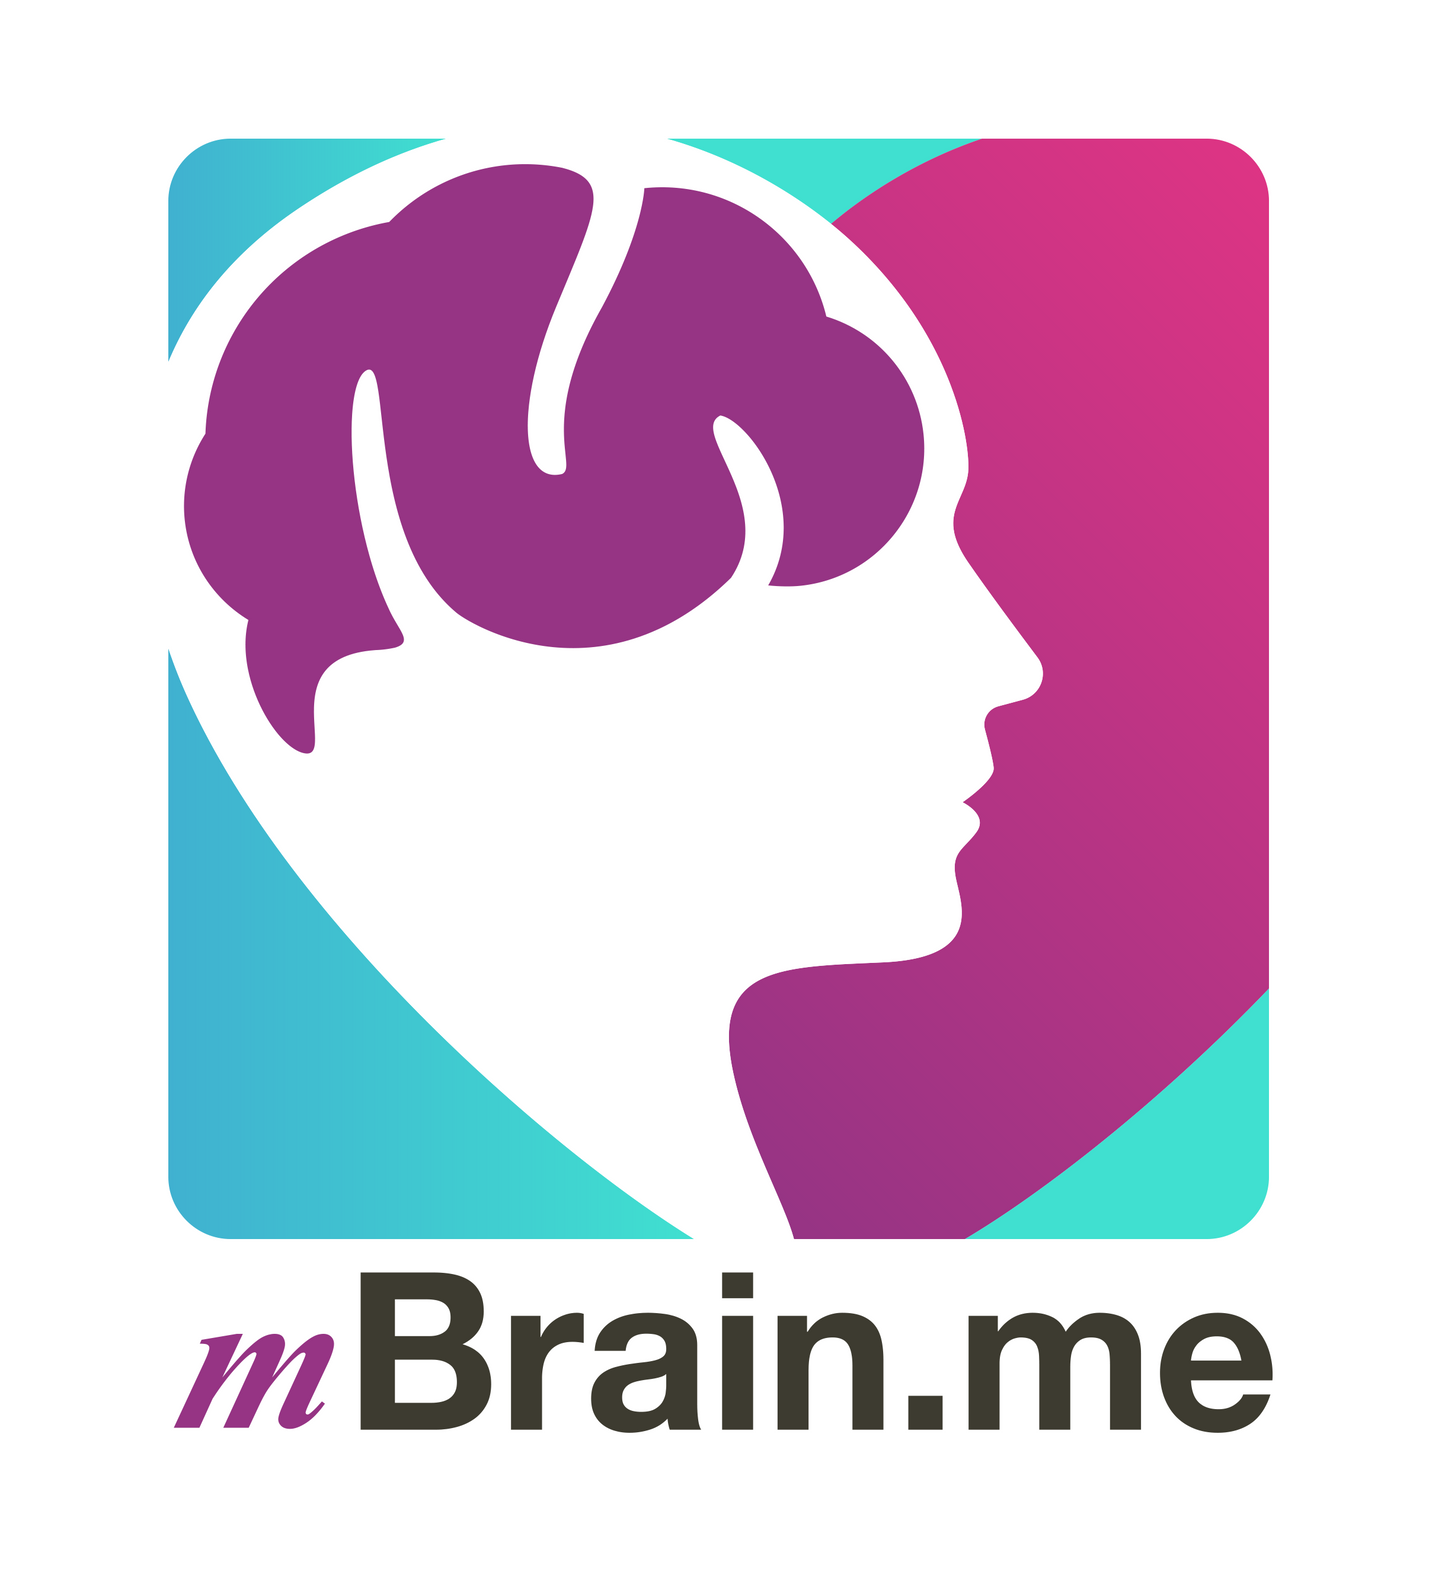 Image Logo for mBrain.me